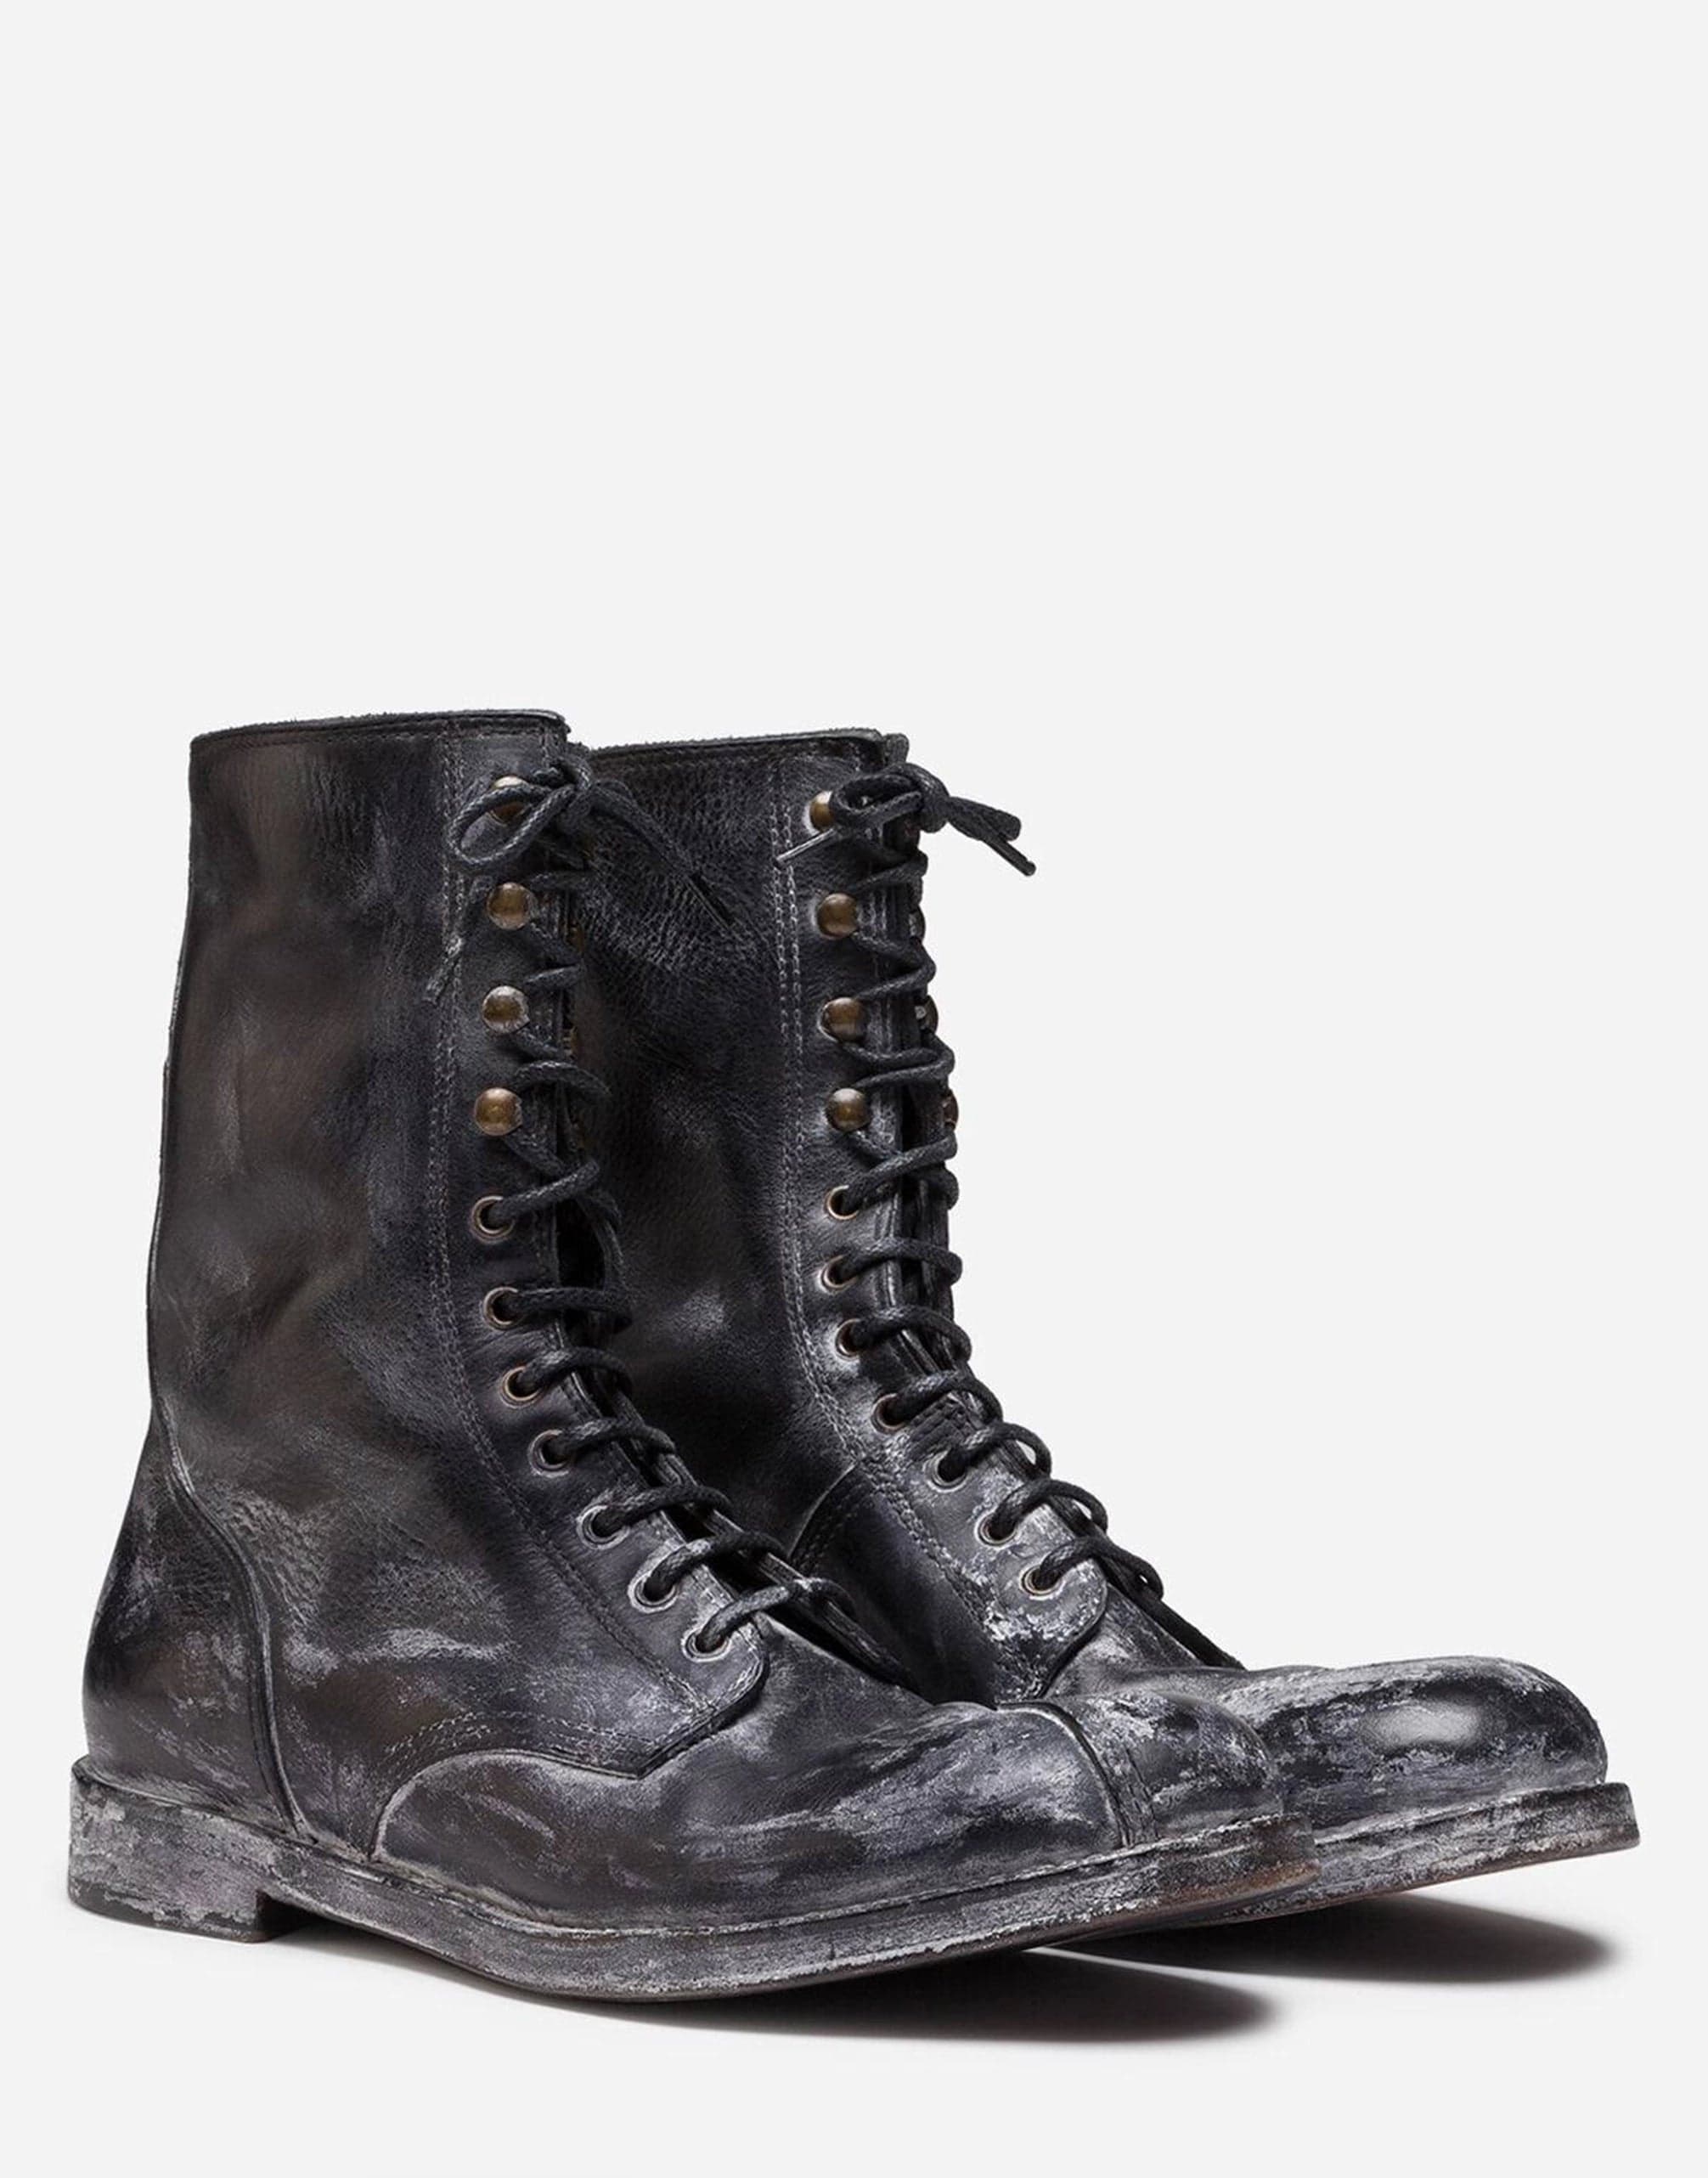 Dolce & Gabbana Leather Lace-Up Boots